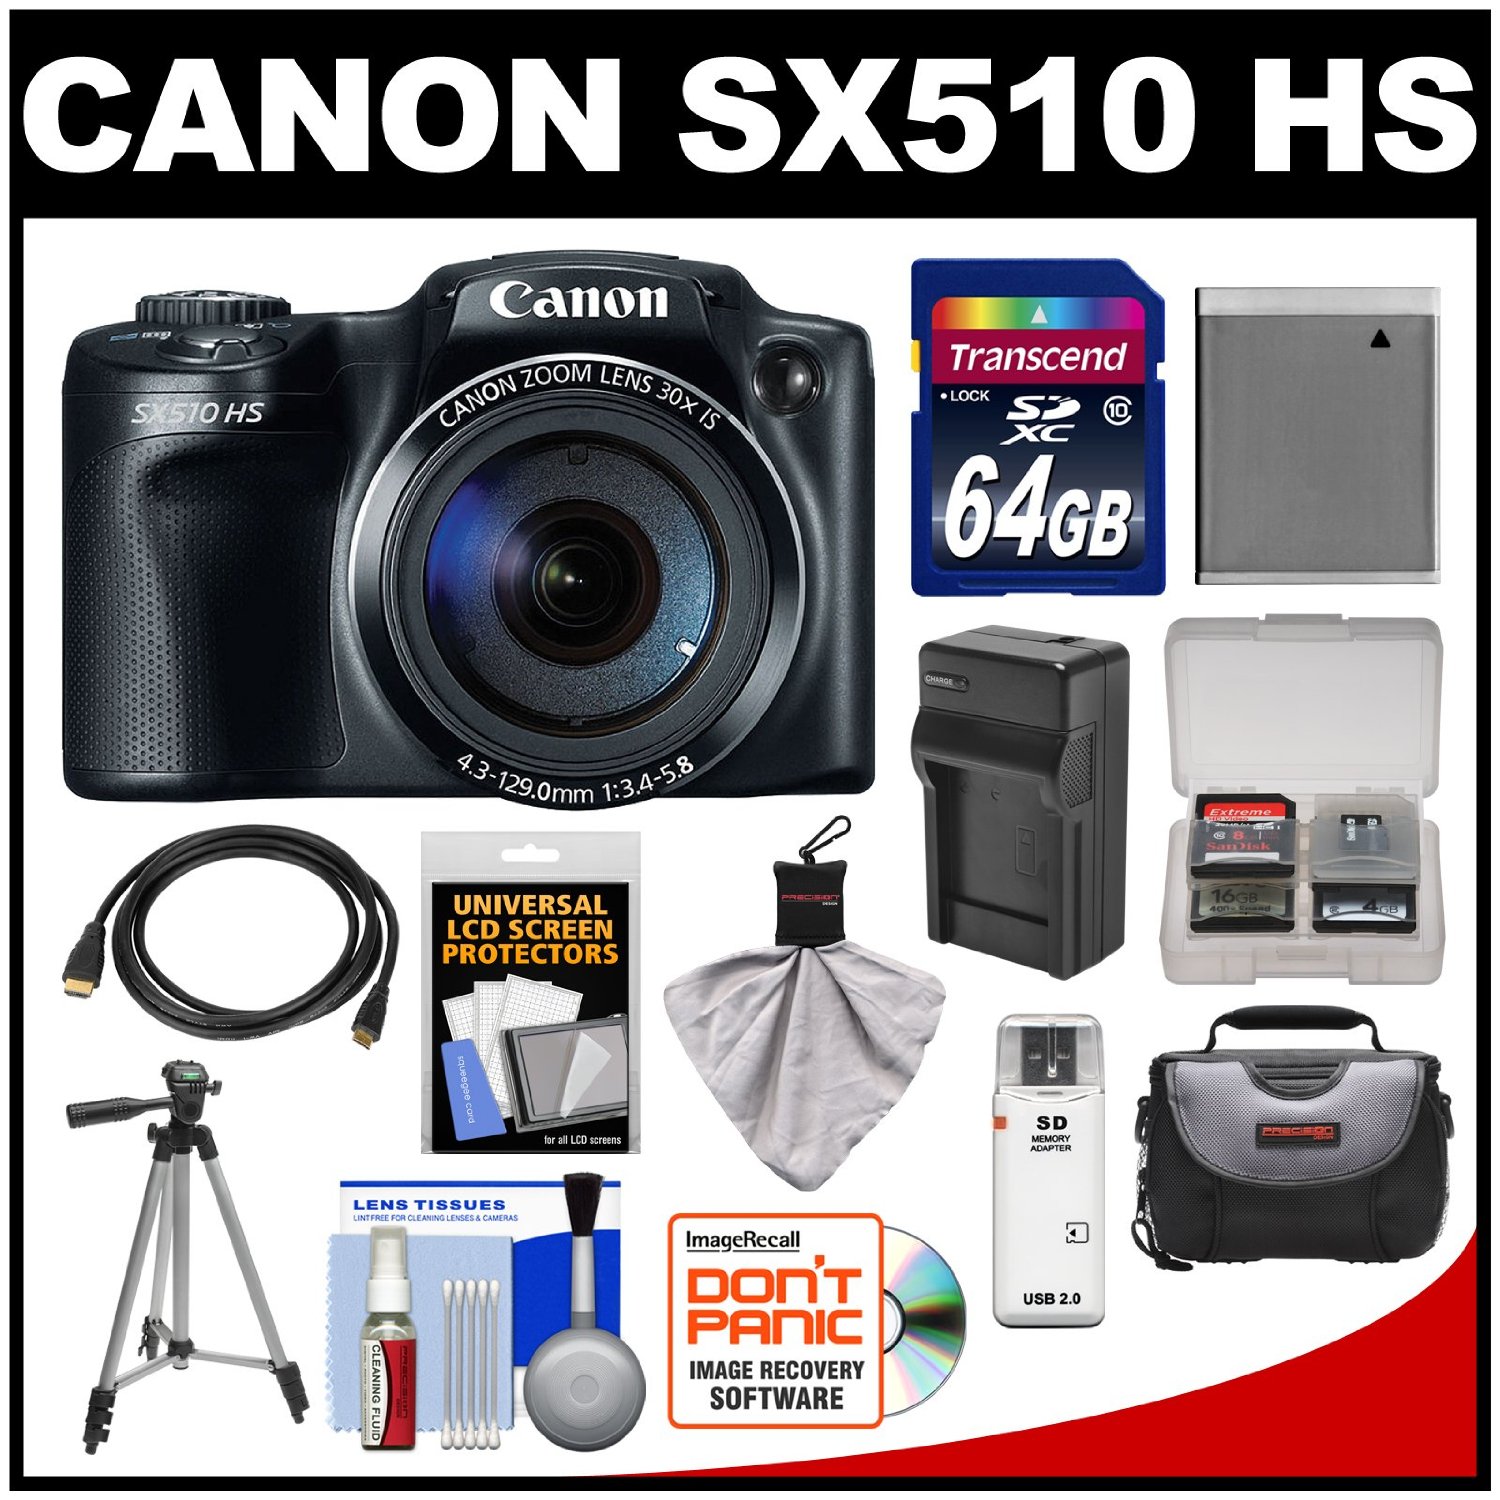 Canon PowerShot SX510 HS Digital Camera (Black) with 64GB Card + Case + Battery & Charger + Tripod + HDMI Cable + Kit